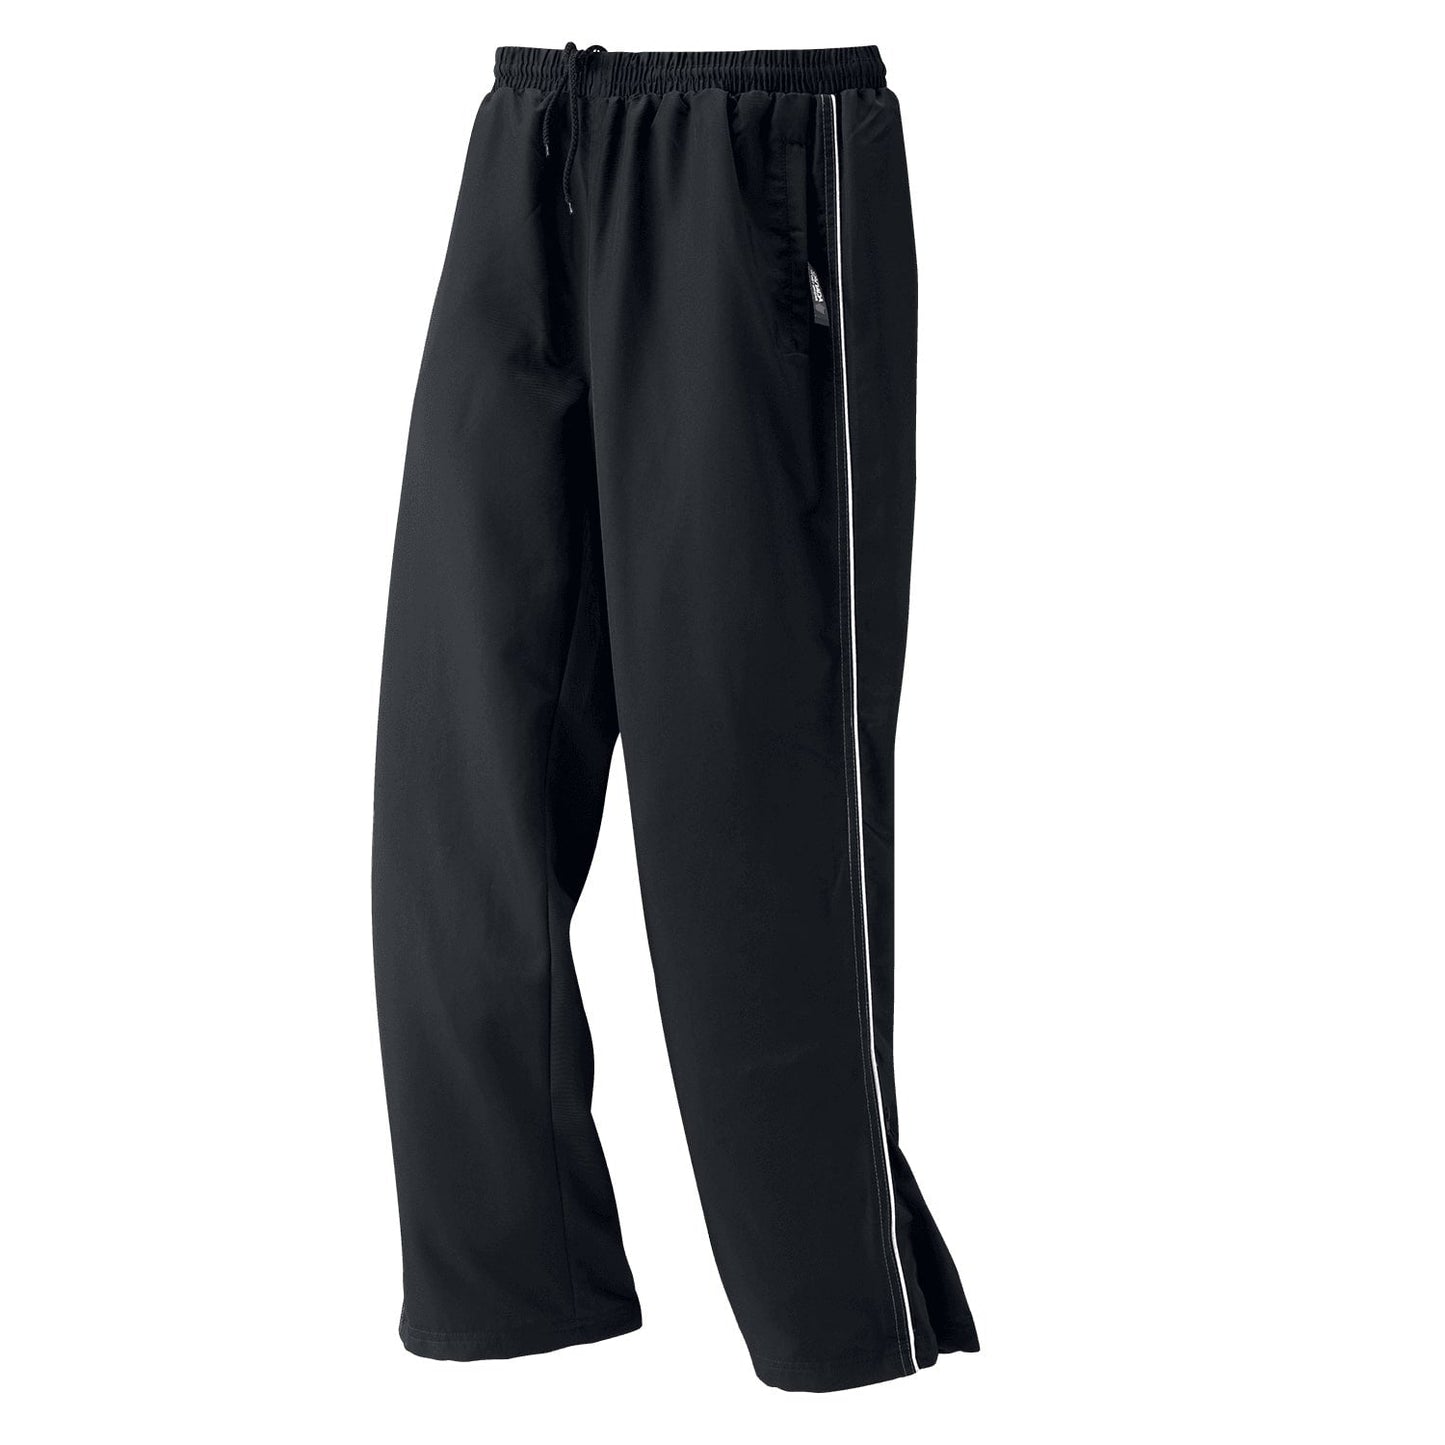 P4075Y - Savvy - Youth Athletic Track Pant - Black / XS